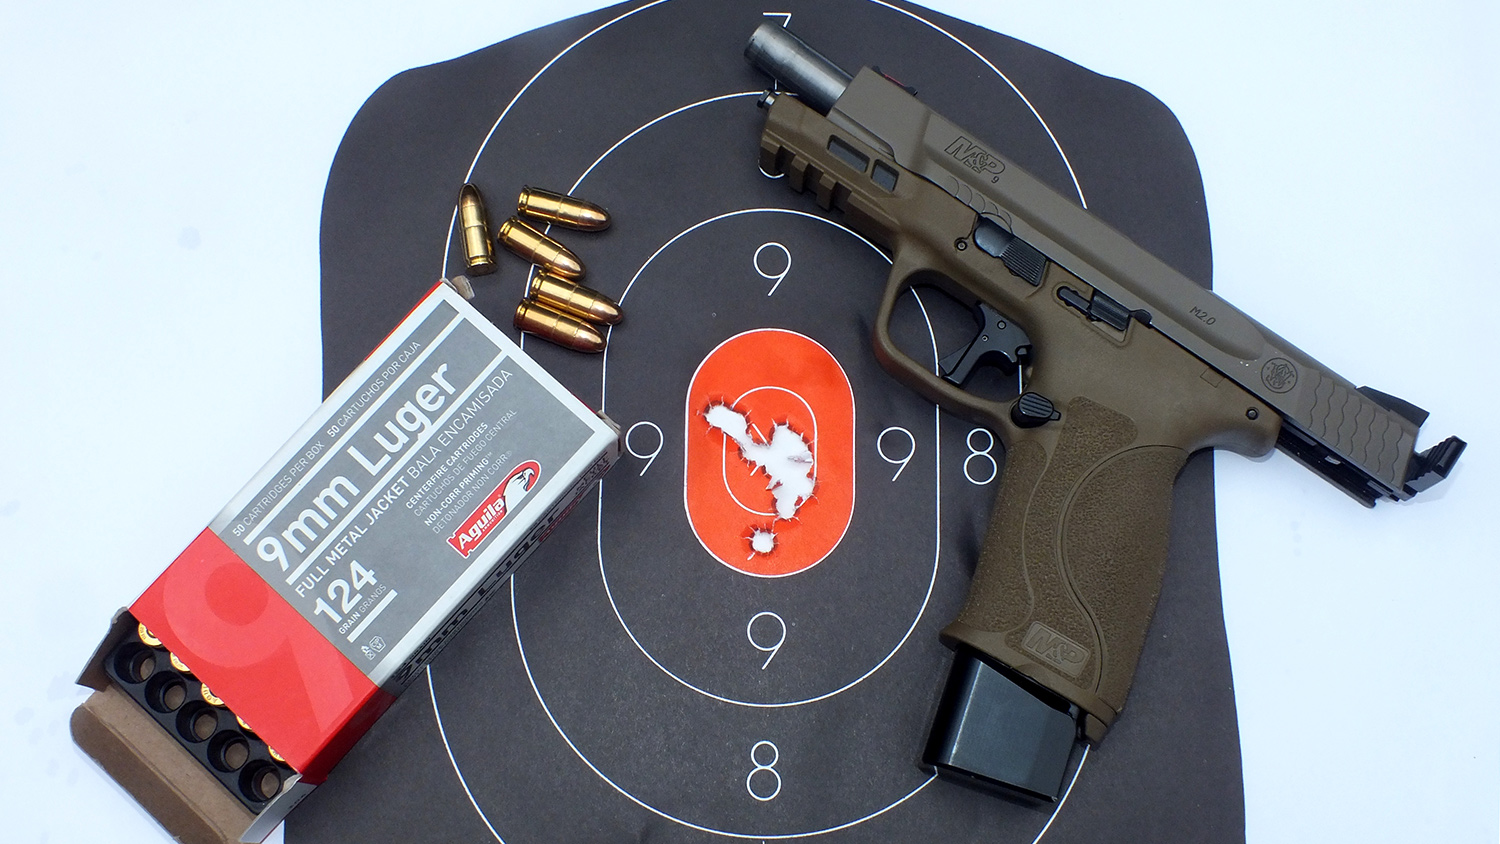 Smith &amp; Wesson M&amp;P Competition Build with Aguila Ammunition